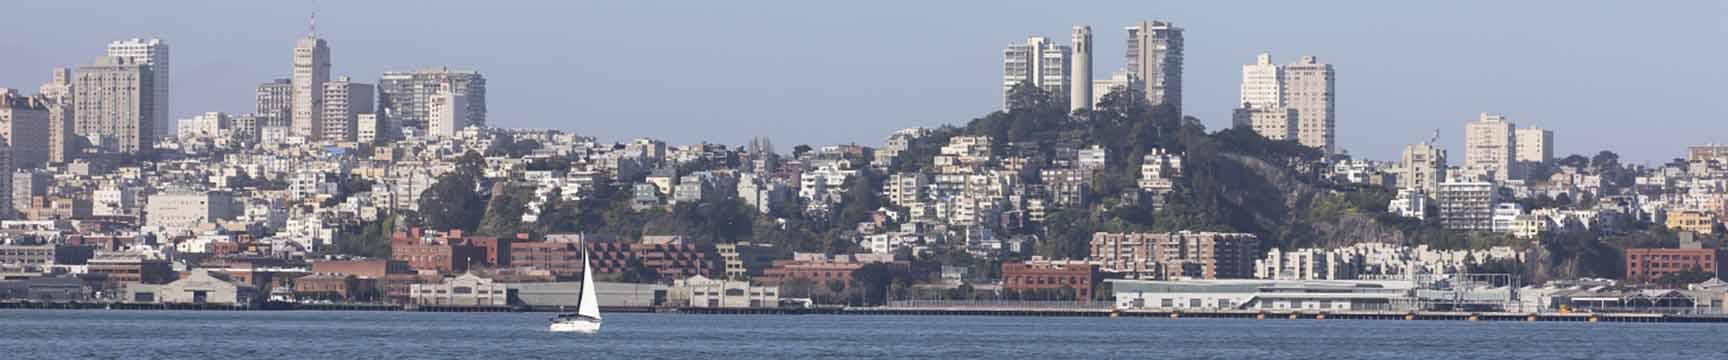 Telegraph Hill neighborhood and waterline in San Francisco skyline from Marin.